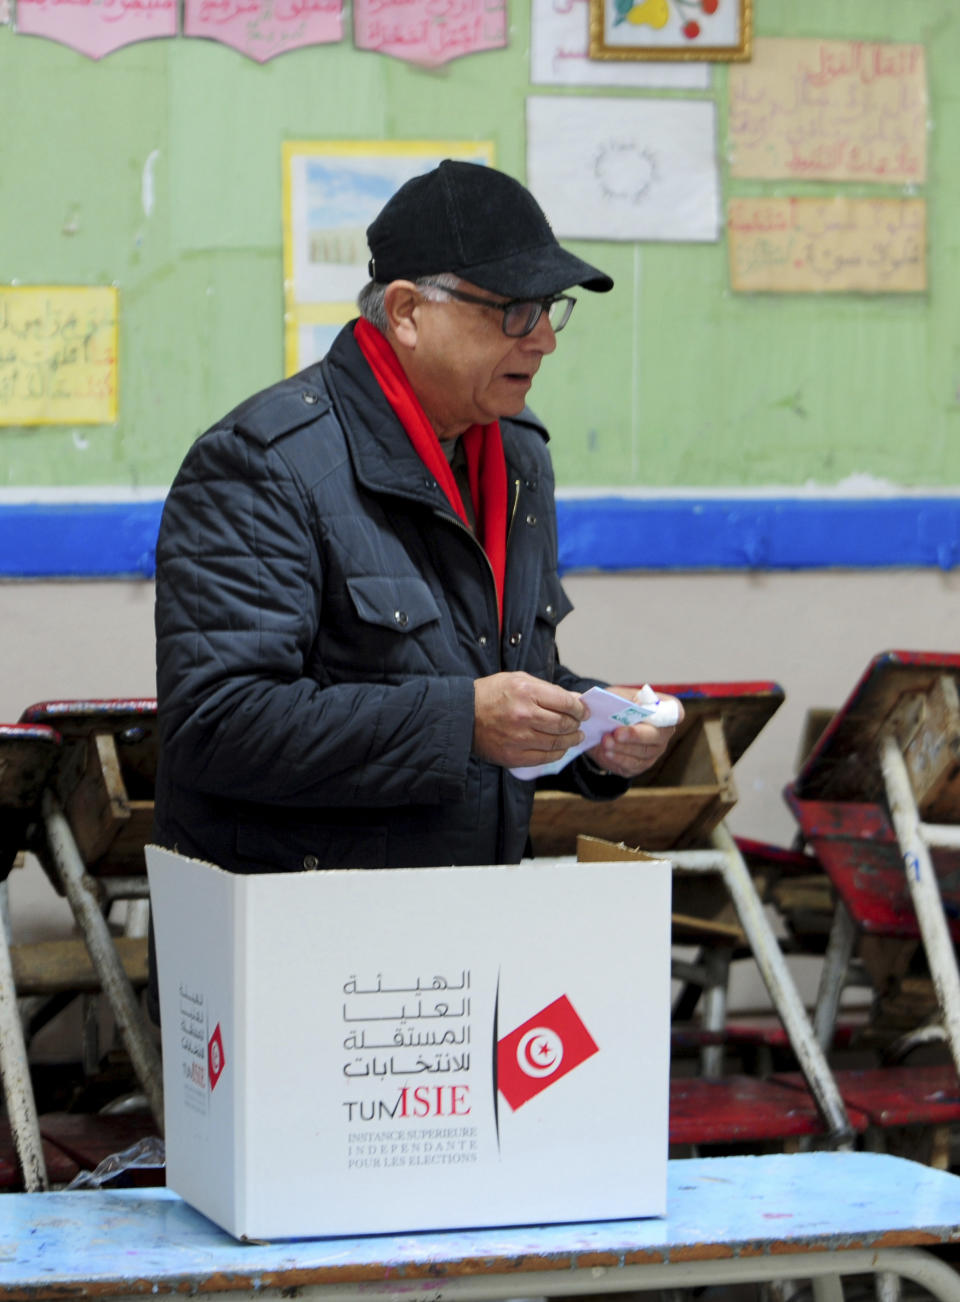 A Tunisian votes in the second round of the legislative elections in Tunis, Sunday, Jan. 29, 2023. Tunisia's president and its shaky democracy are facing an important test Sunday as voters cast ballots in the second round of parliamentary elections. Turnout was just 11% in the first round of voting last month. (AP Photo/Hassene Dridi)